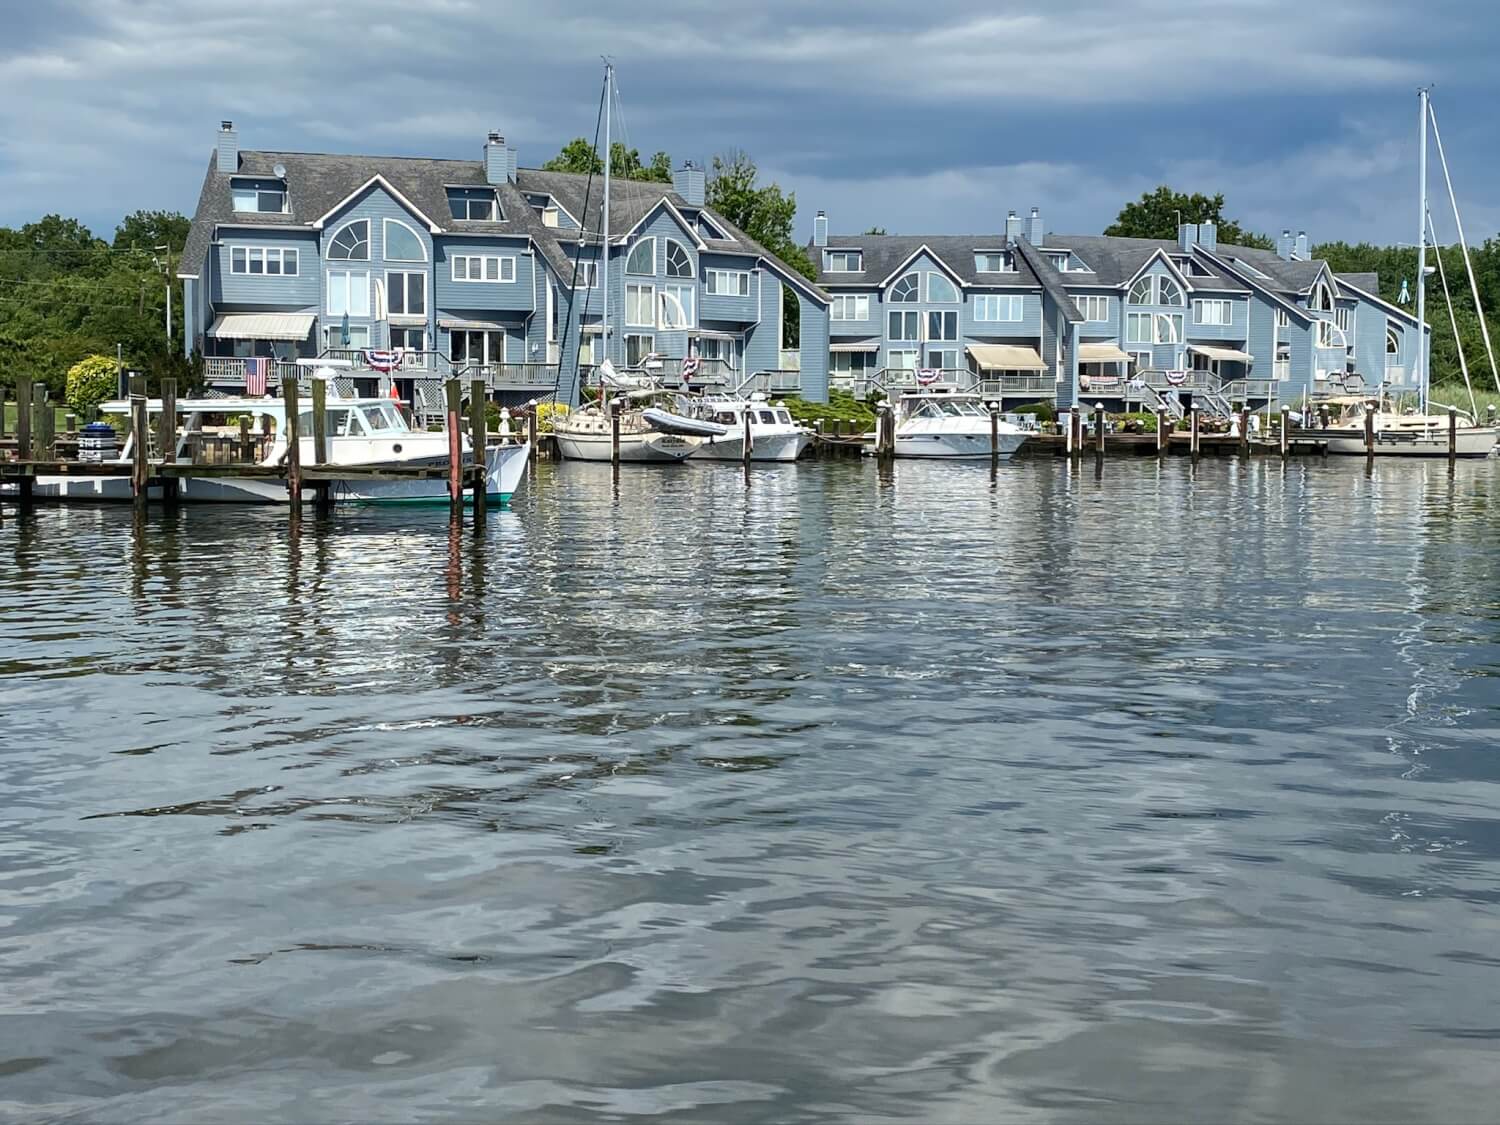 Waterfront homes in Rock Hall, MD